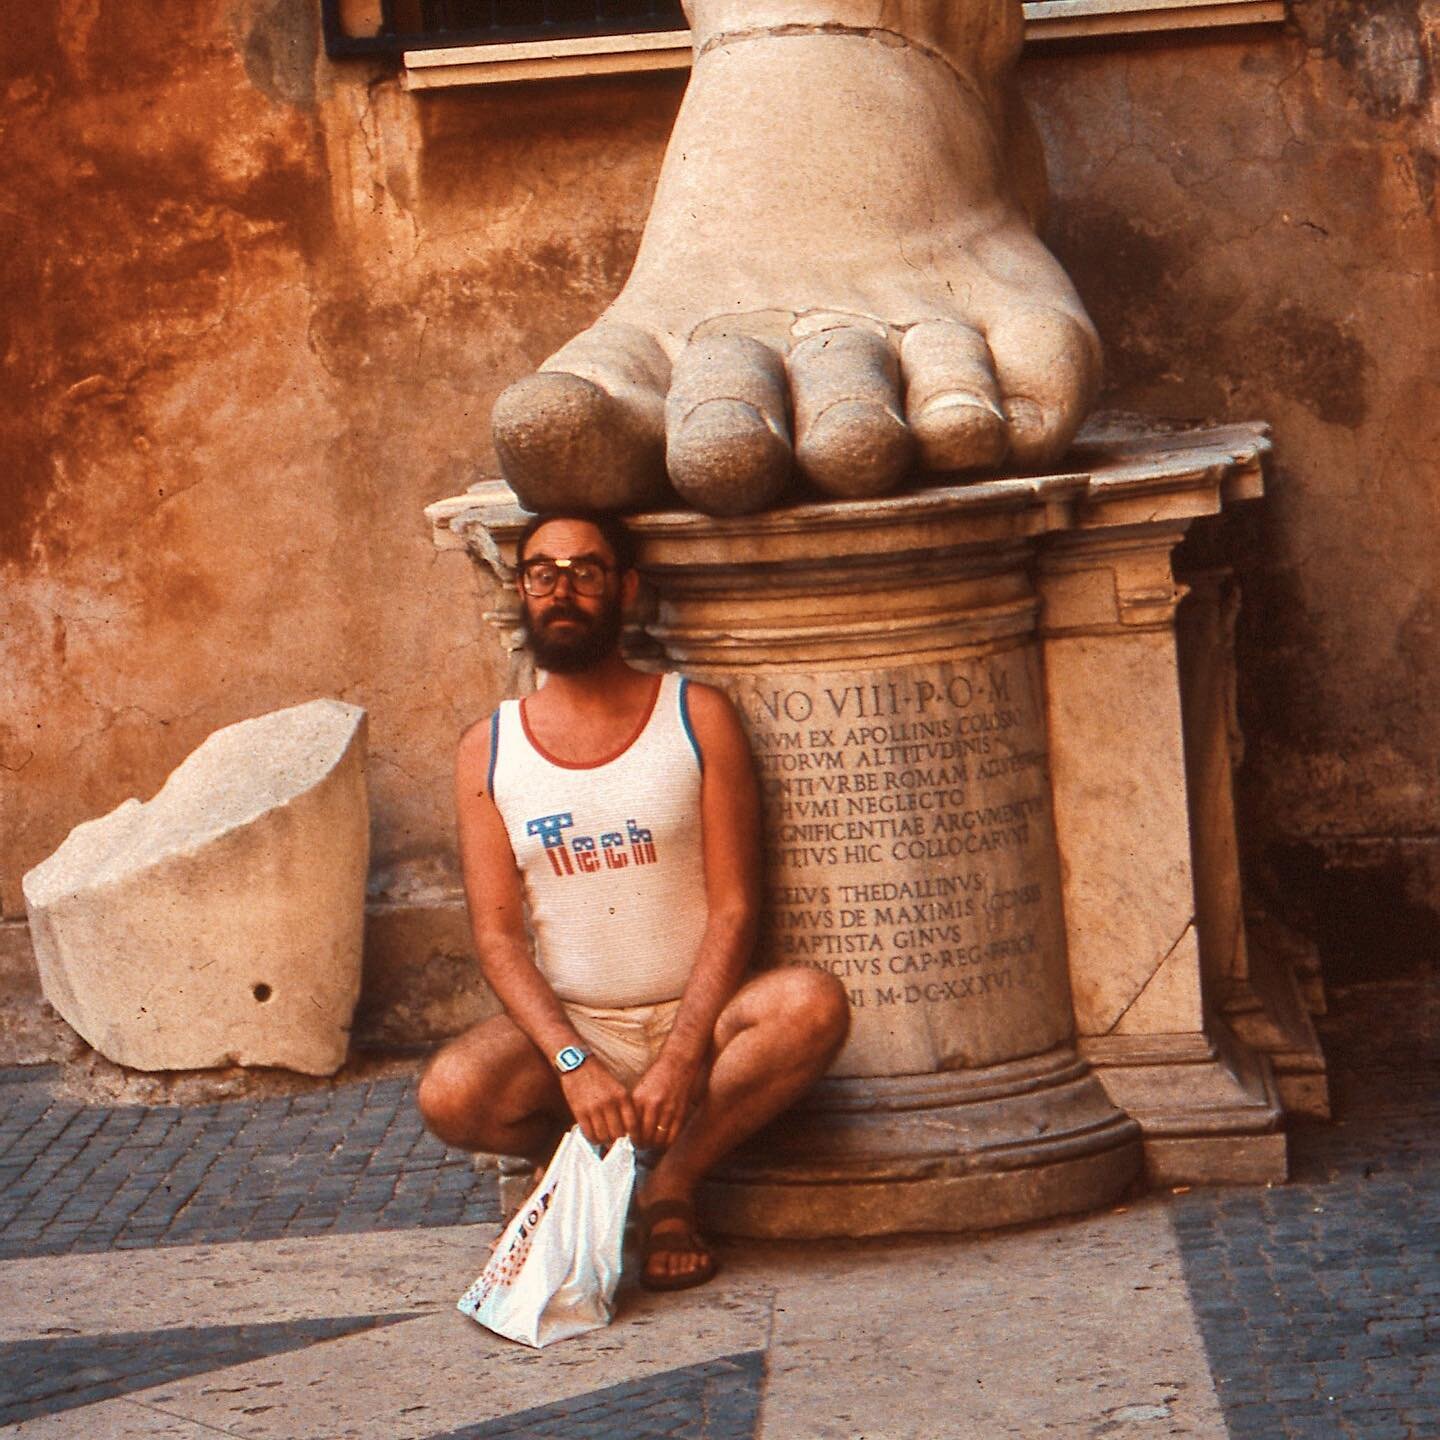 Some photos from my parent&rsquo;s trip to Italy in 1985. Photos in order:
1. My Dad making a funny face in front of an ancient foot 
2. Vintage Italian cars in the perfect color scheme
3. Dad with friends. Susan in this photo still lives in Rome and